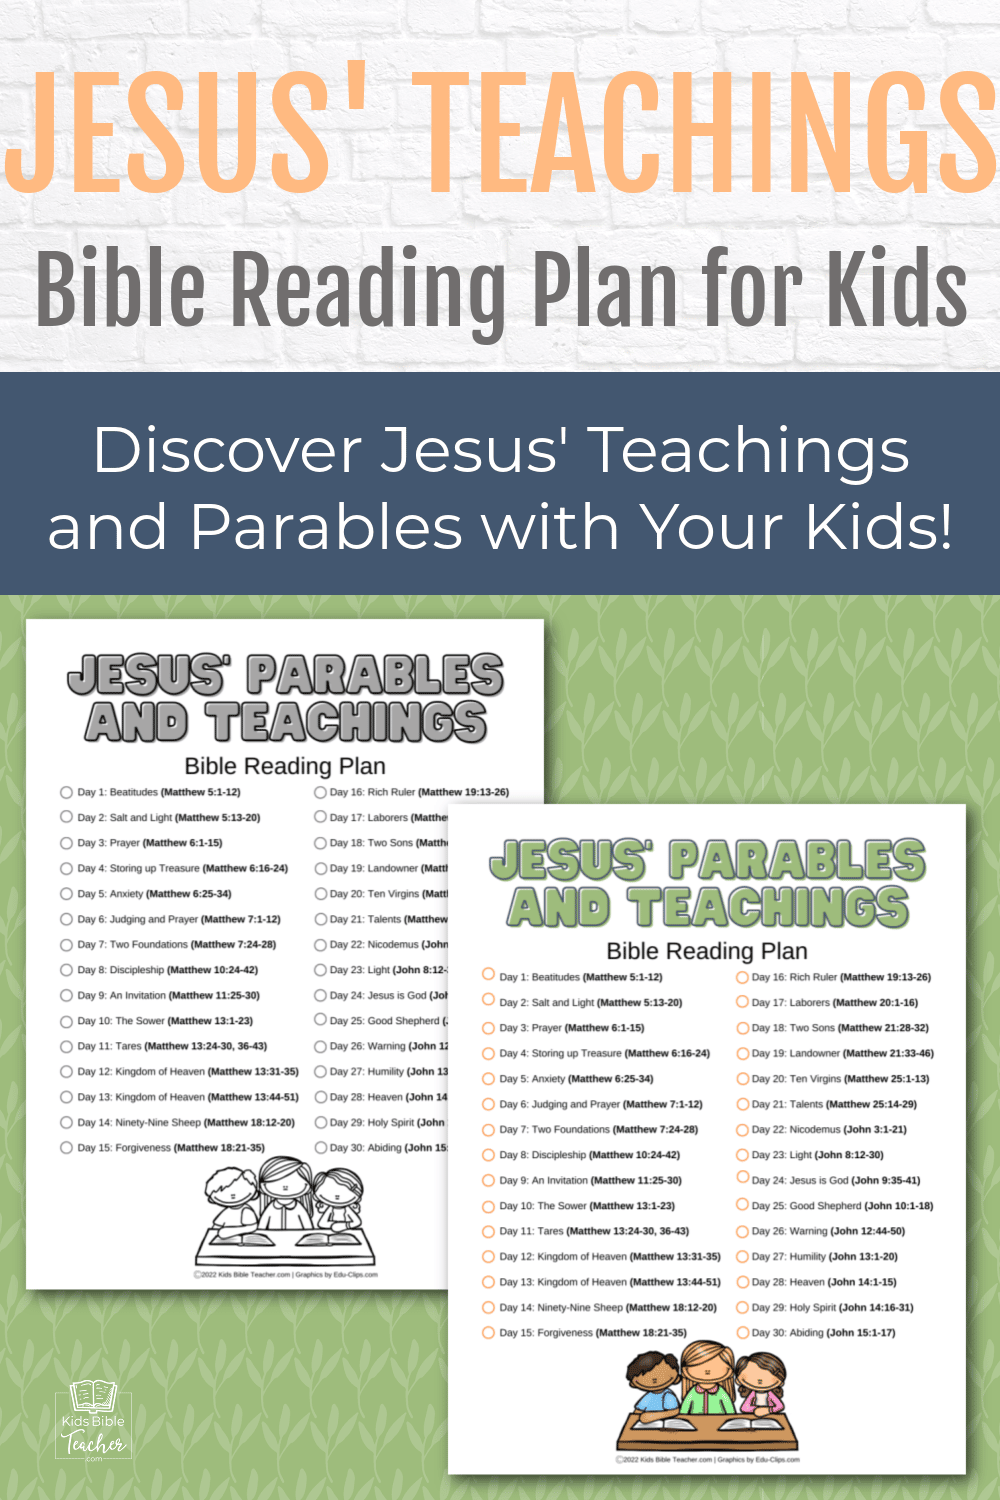 Help your kids deepen their faith with this FREE printable Jesus' Teachings and Parables Bible reading plan for kids.